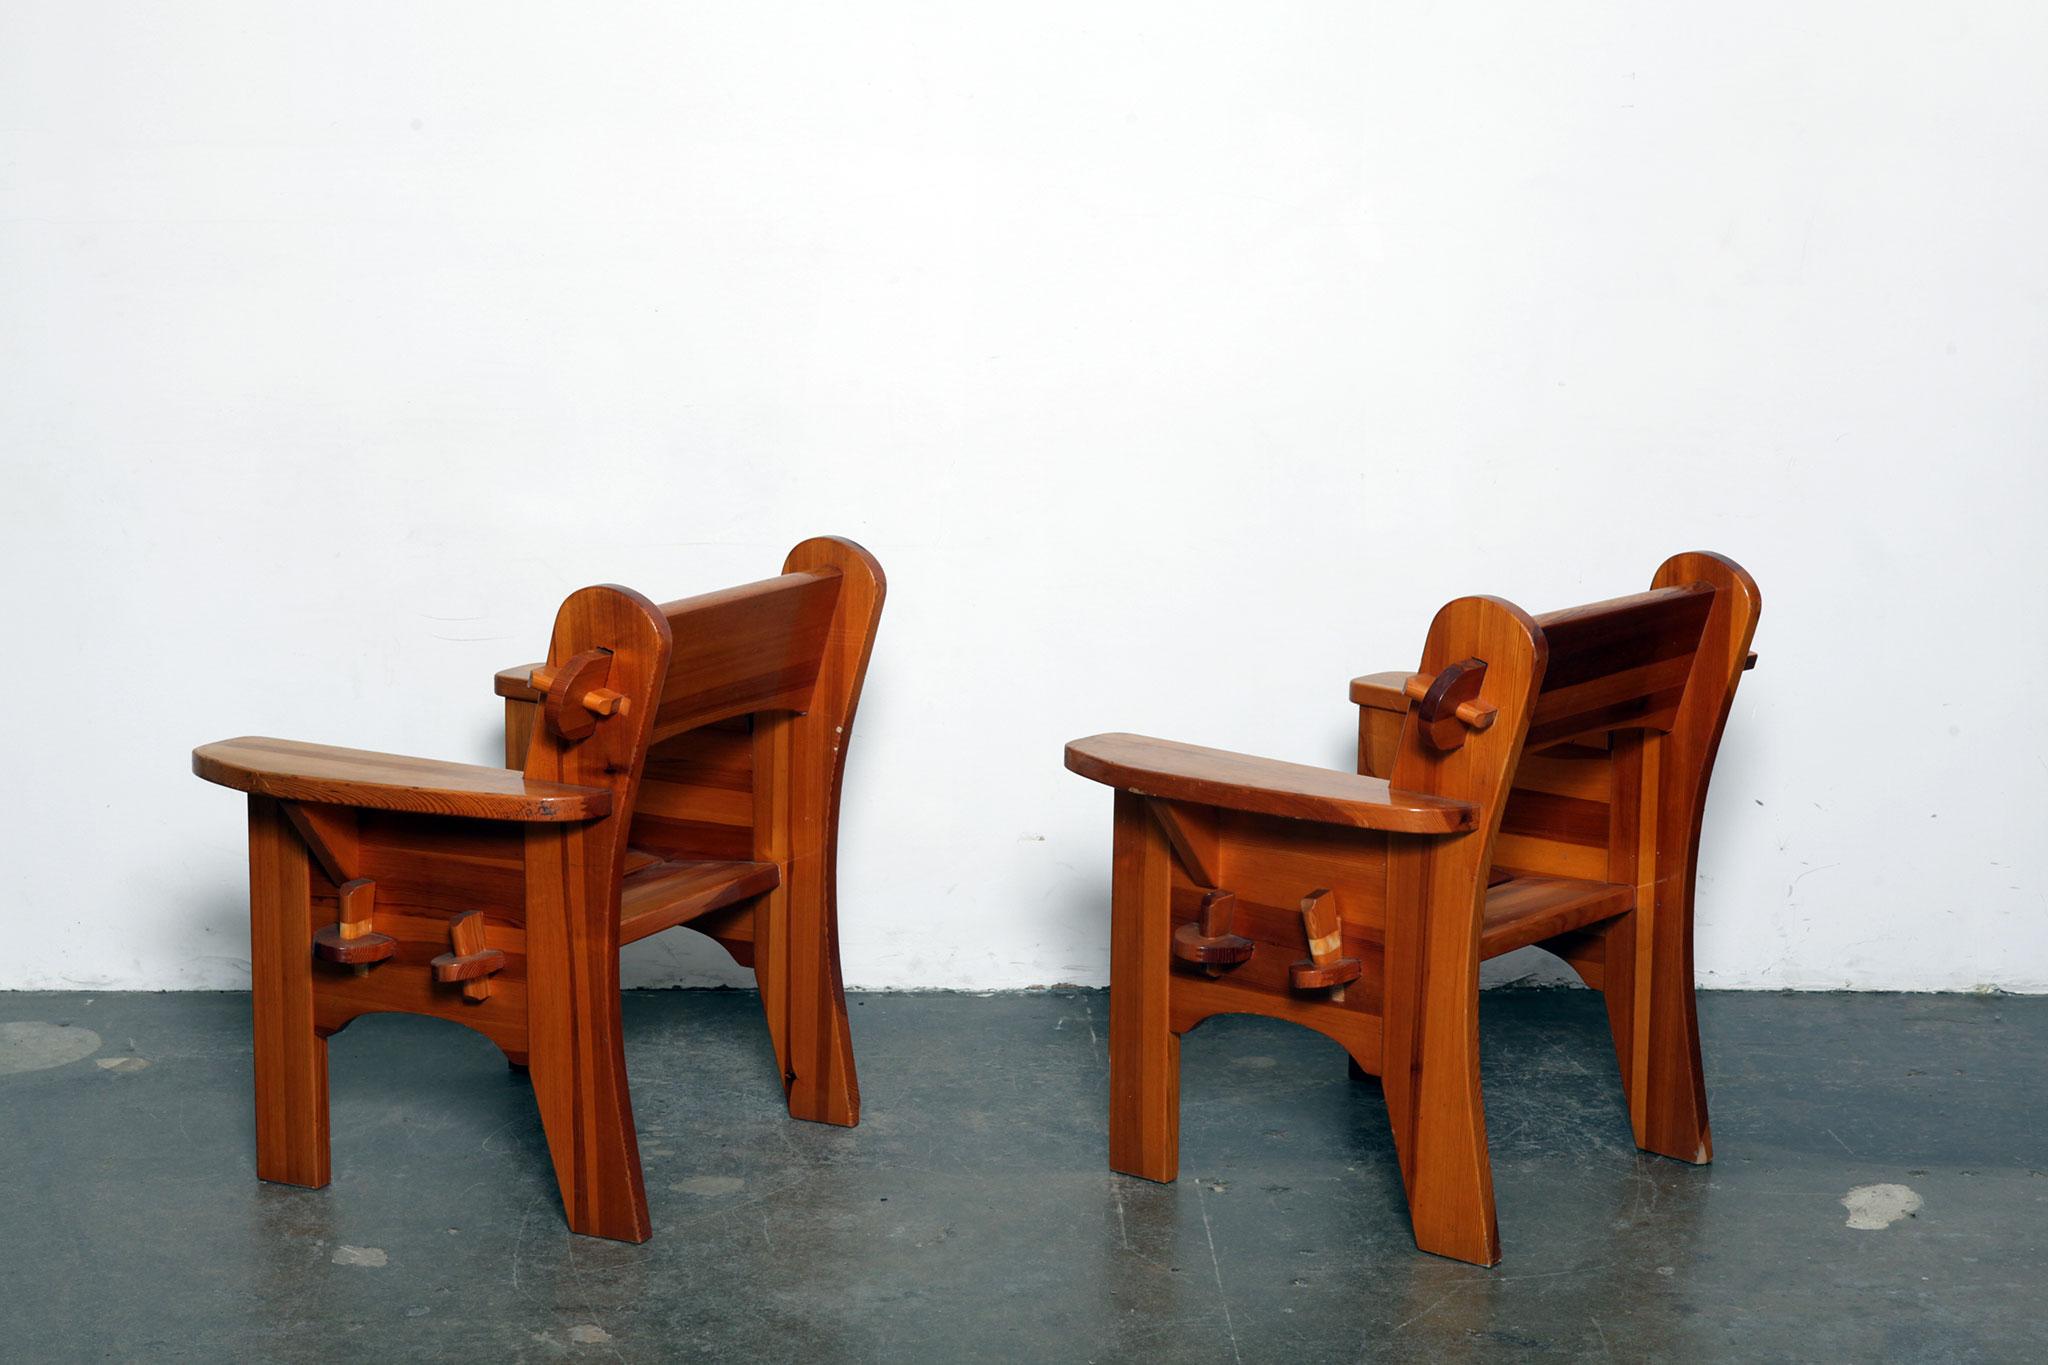 Pair of Solid Pine 'Berga' Chairs by David Rosen for Nordiska Kompaniet, Sweden In Good Condition For Sale In North Hollywood, CA